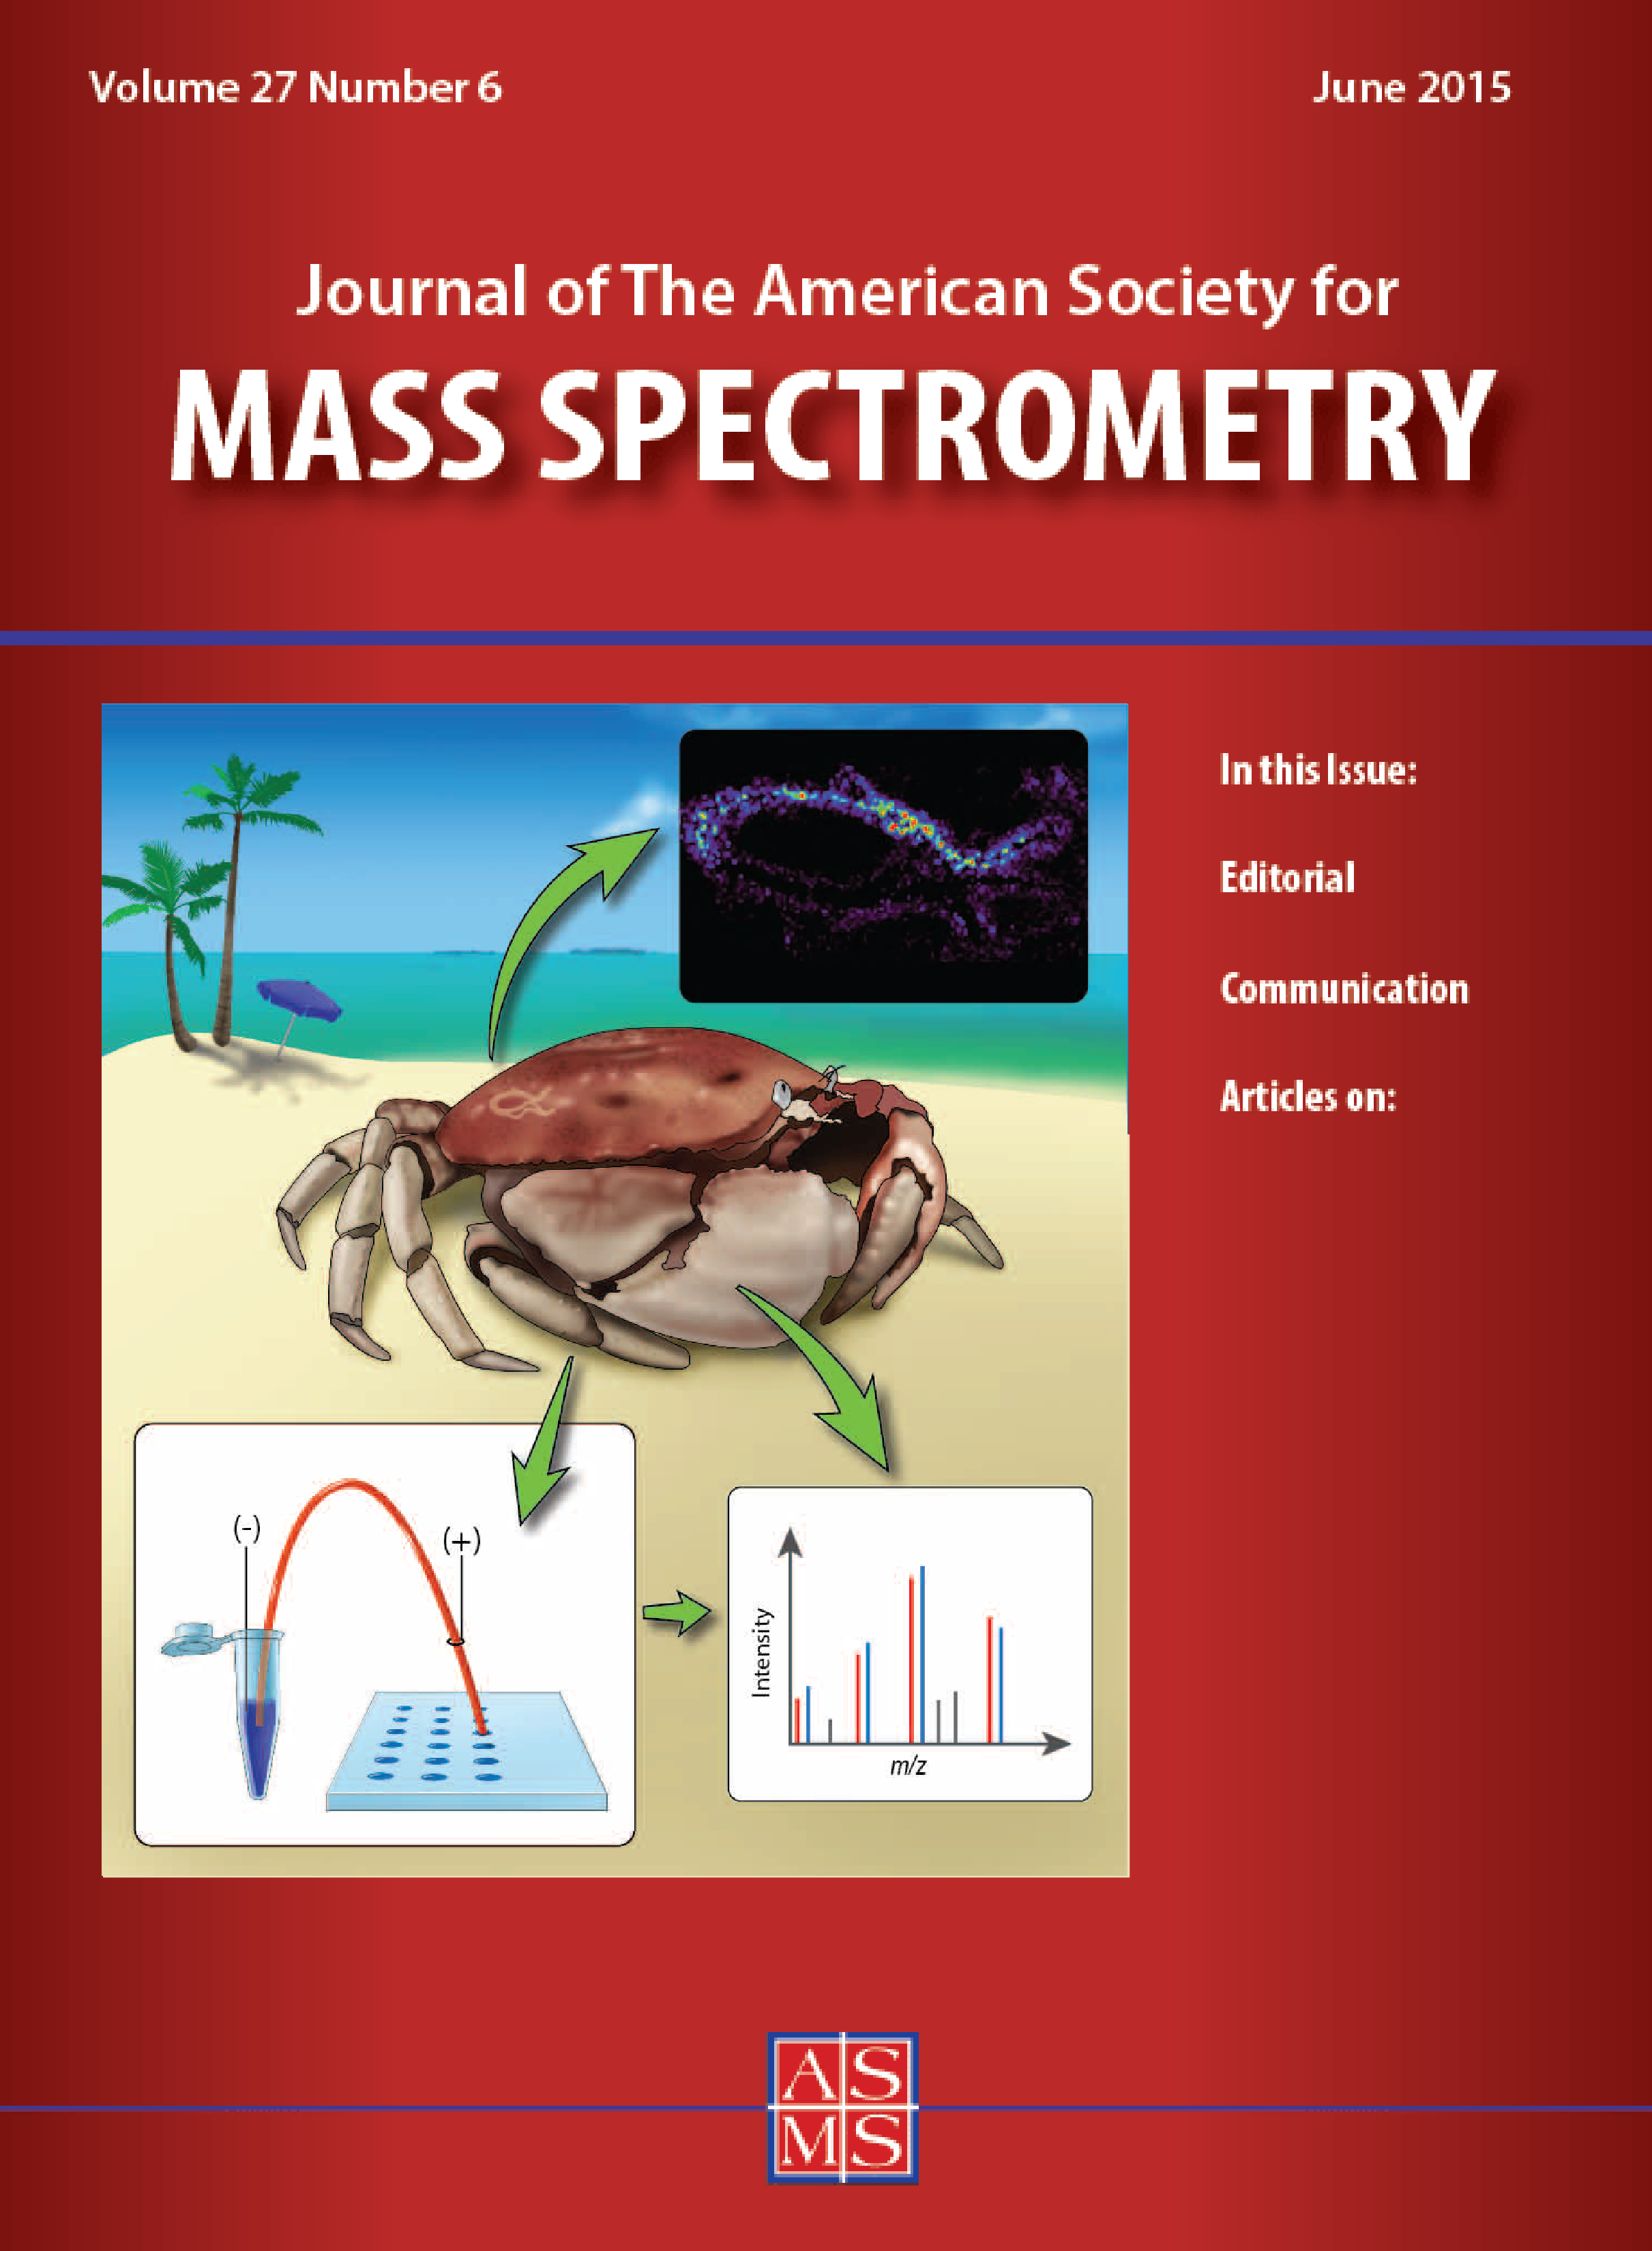 Journal of The American Society for Mass Spectrometry Vol. 27 No. 6 cover